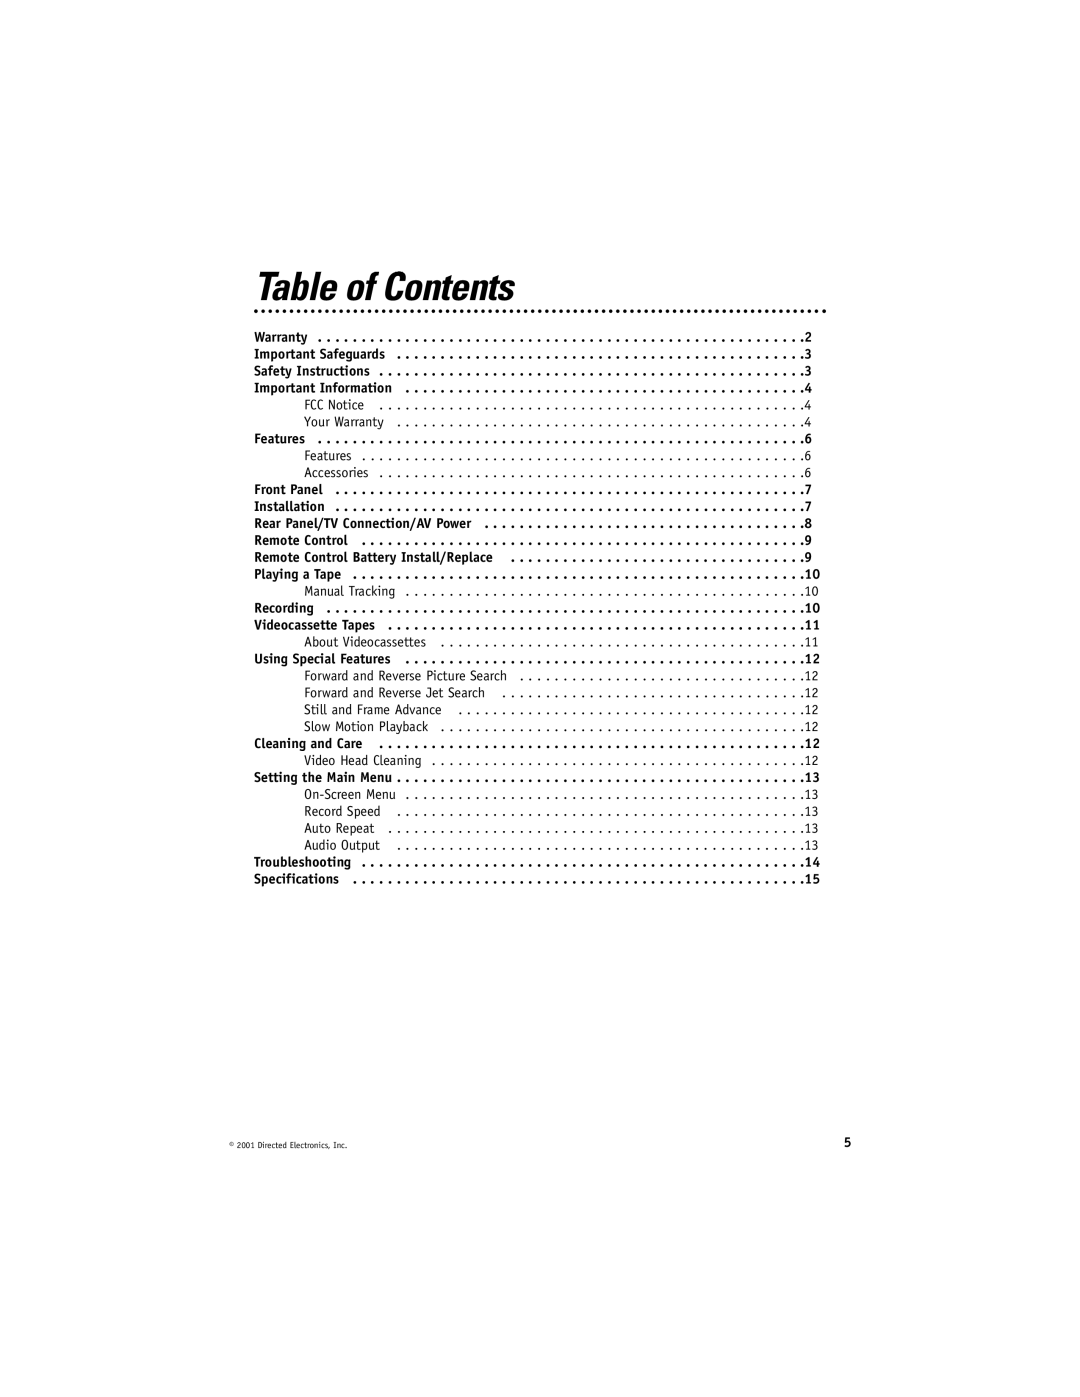 Directed Electronics VC2010 manual Table of Contents, Rear Panel/TV Connection/AV Power 